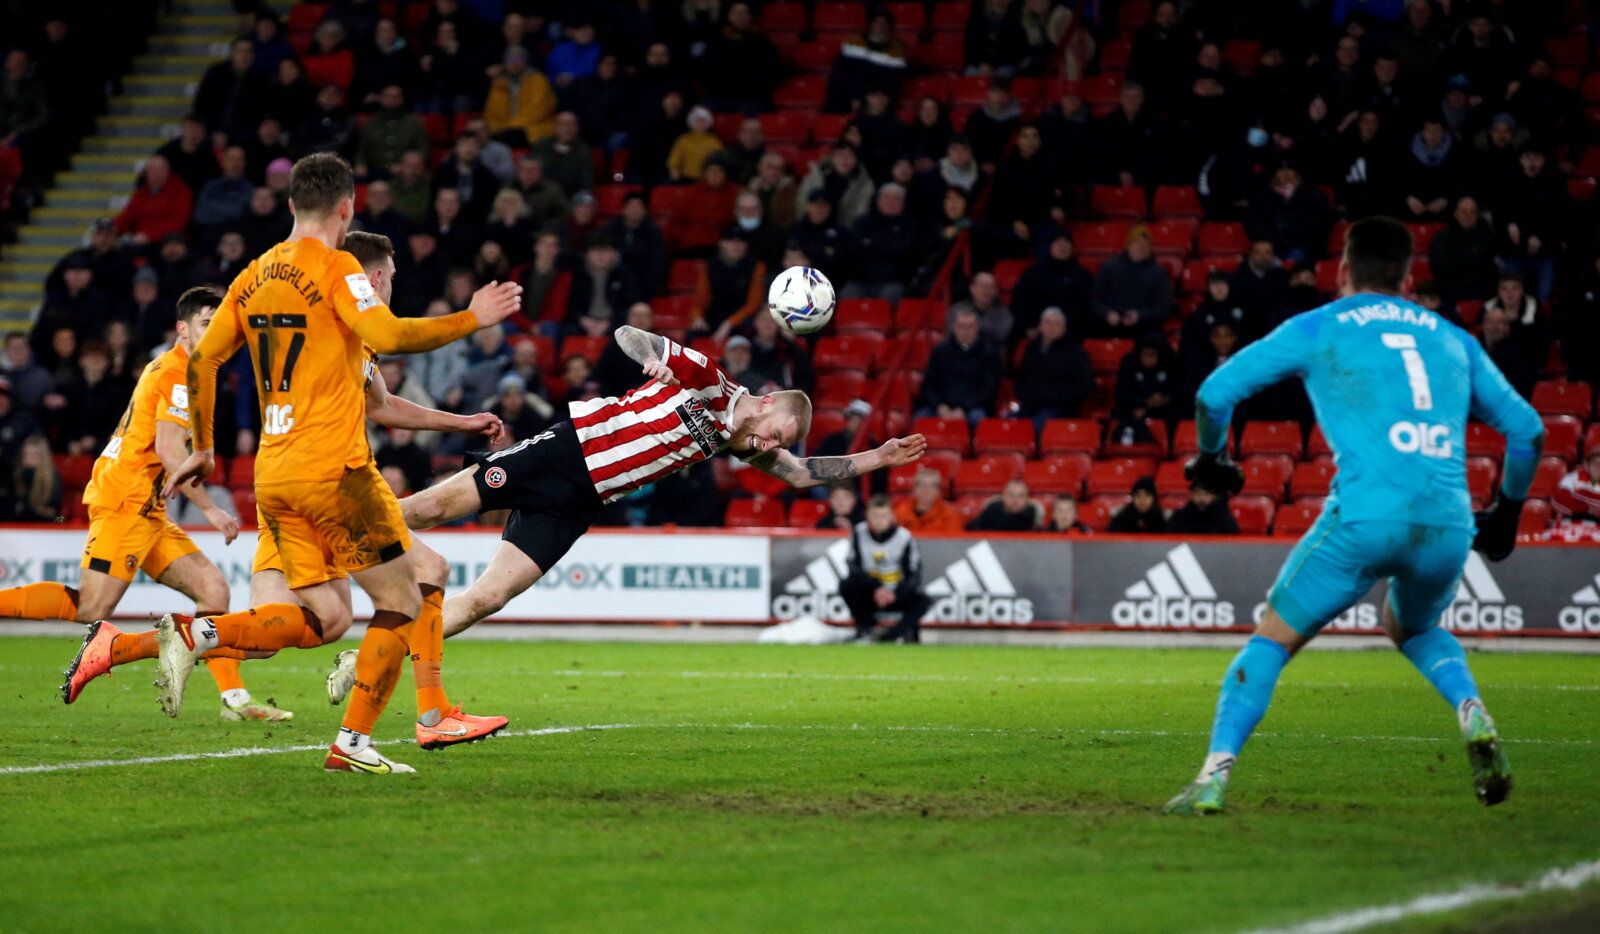 Soccer Football - Championship - Sheffield United v Hull City - Bramall Lane, Sheffield, Britain - February 15, 2022 Sheffield United's Oli McBurnie misses a chance to score with a header Action Images/Ed Sykes  EDITORIAL USE ONLY. No use with unauthorized audio, video, data, fixture lists, club/league logos or 